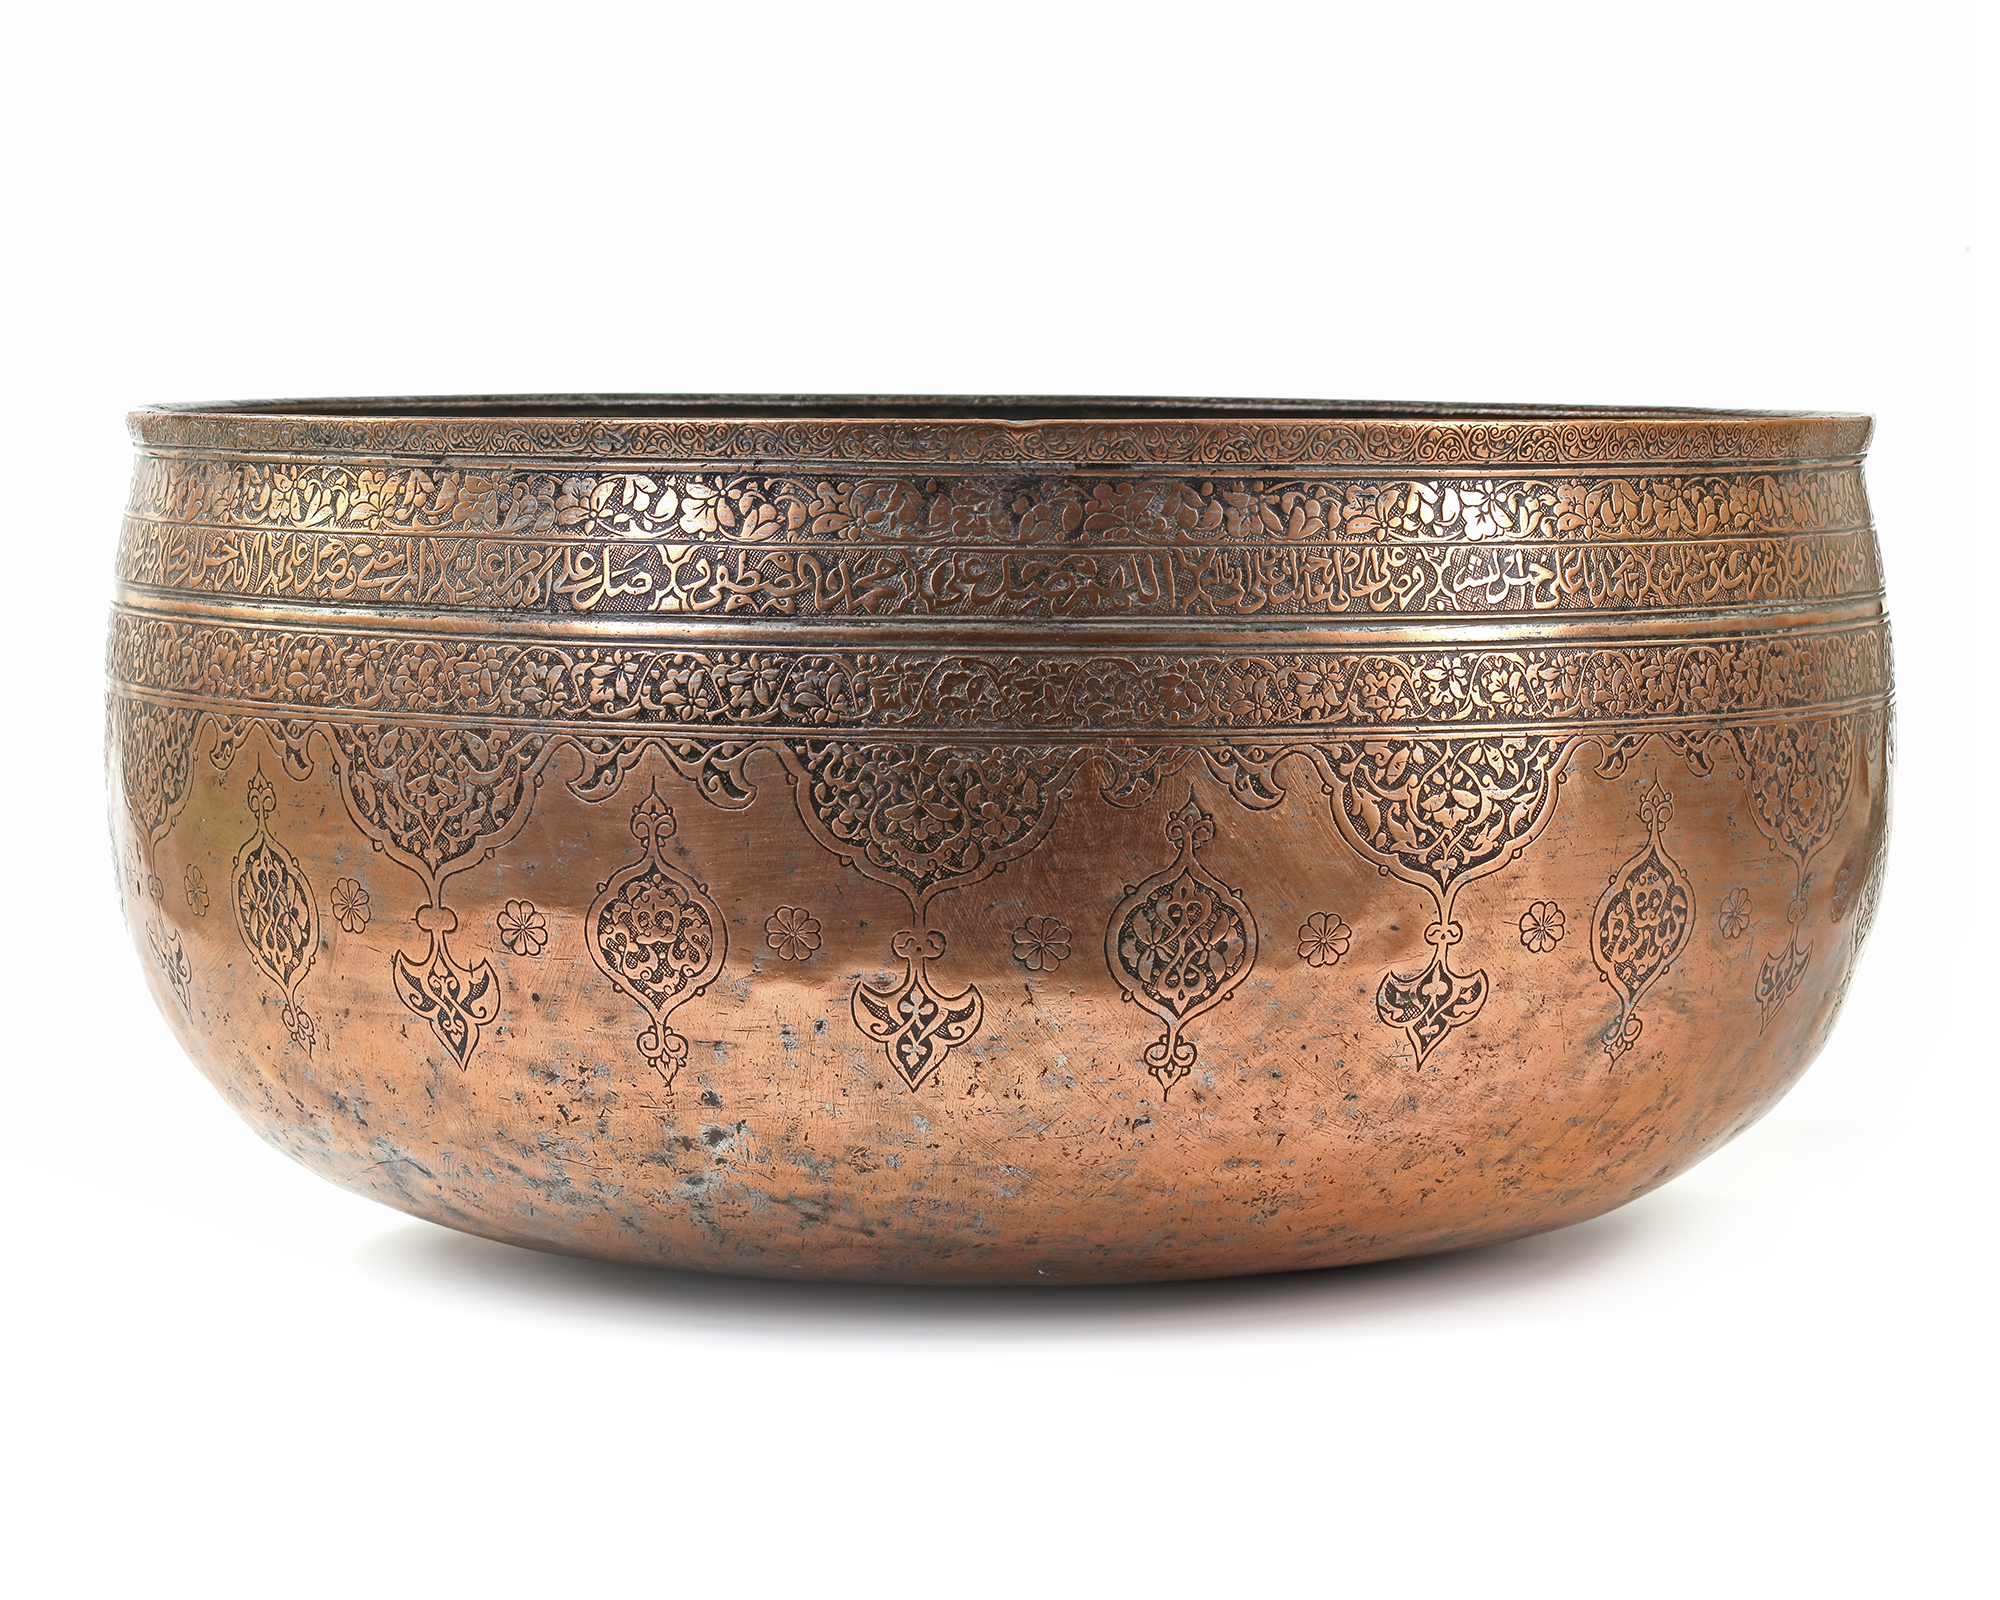 A MONUMENTAL LATE TIMURID ENGRAVED COPPER BOWL, CENTRAL ASIA, LATE